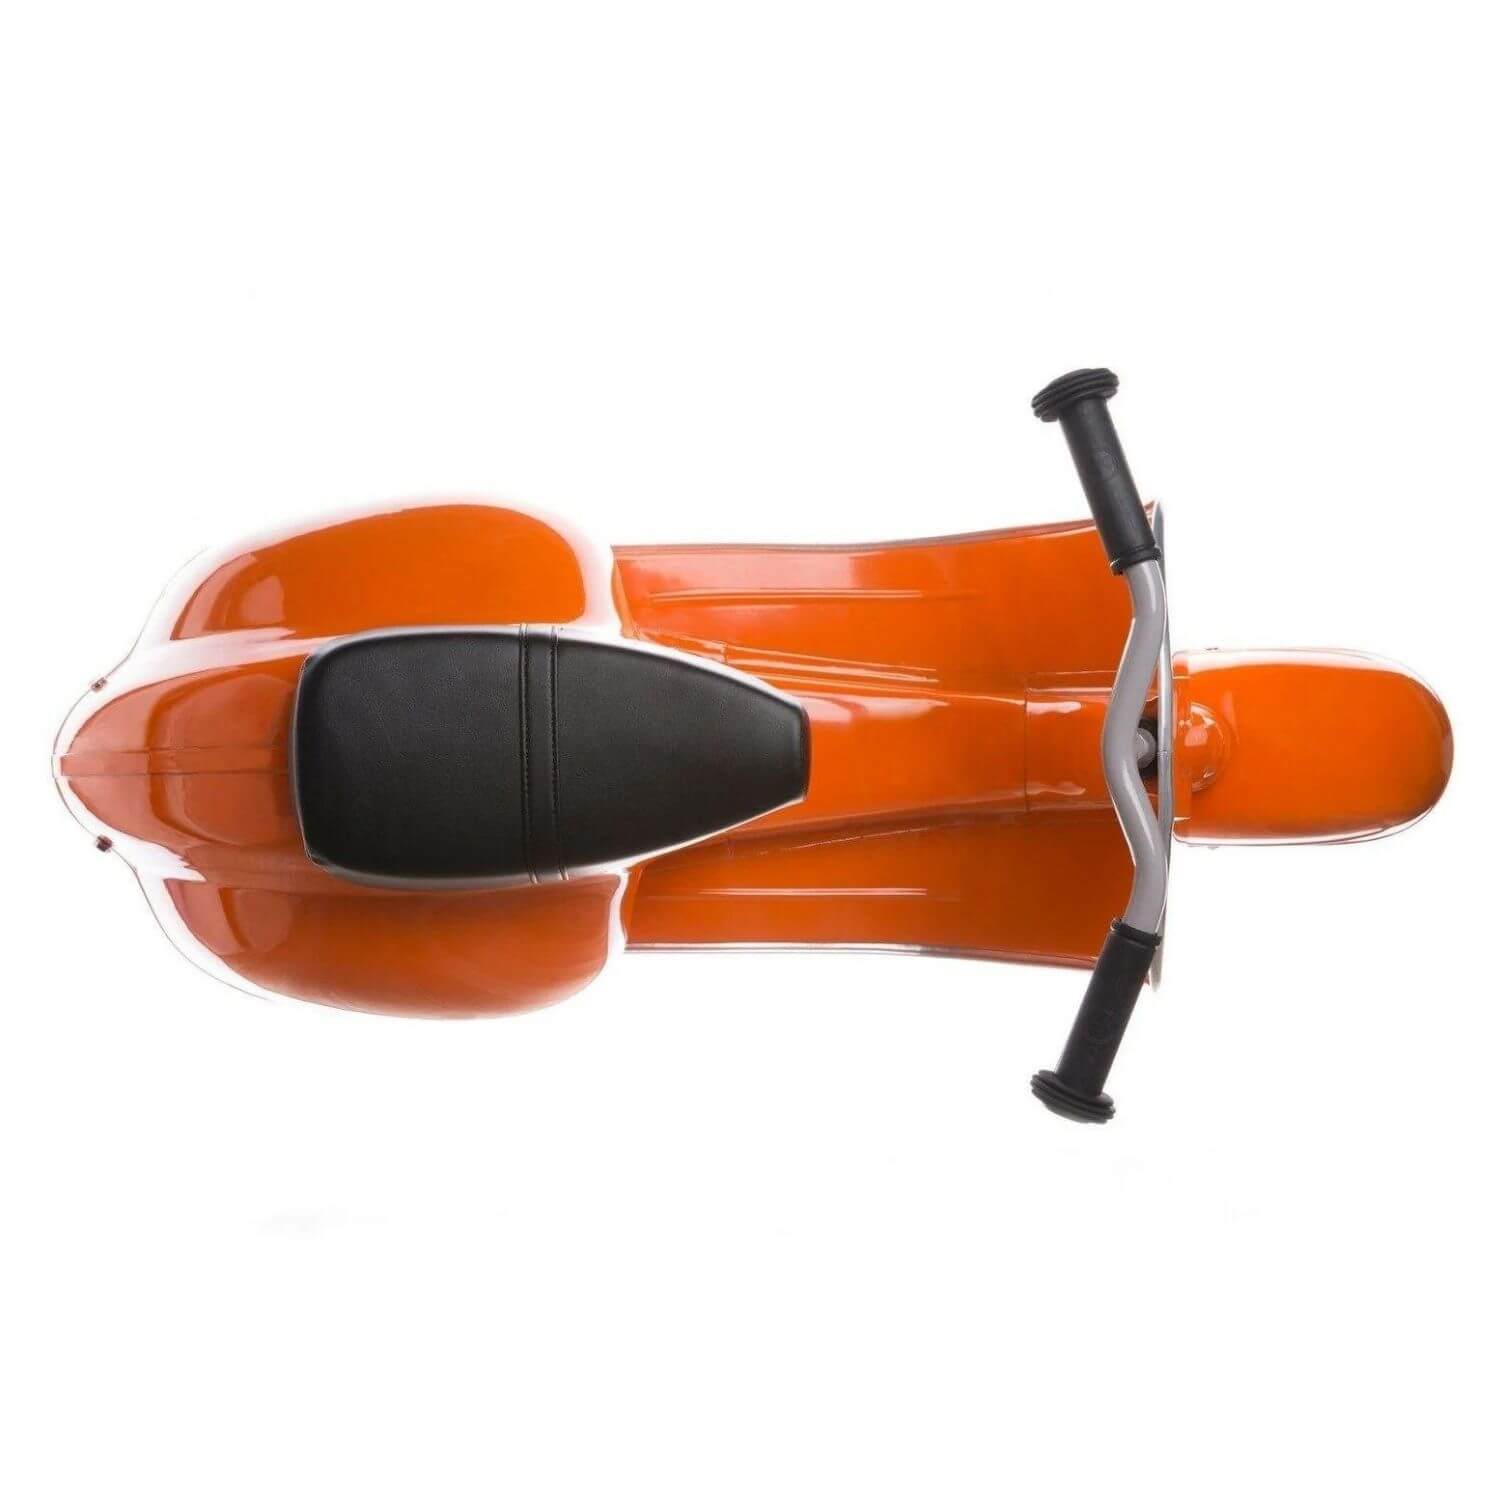 Primo Classic Ride-On Scooter Orange - Top